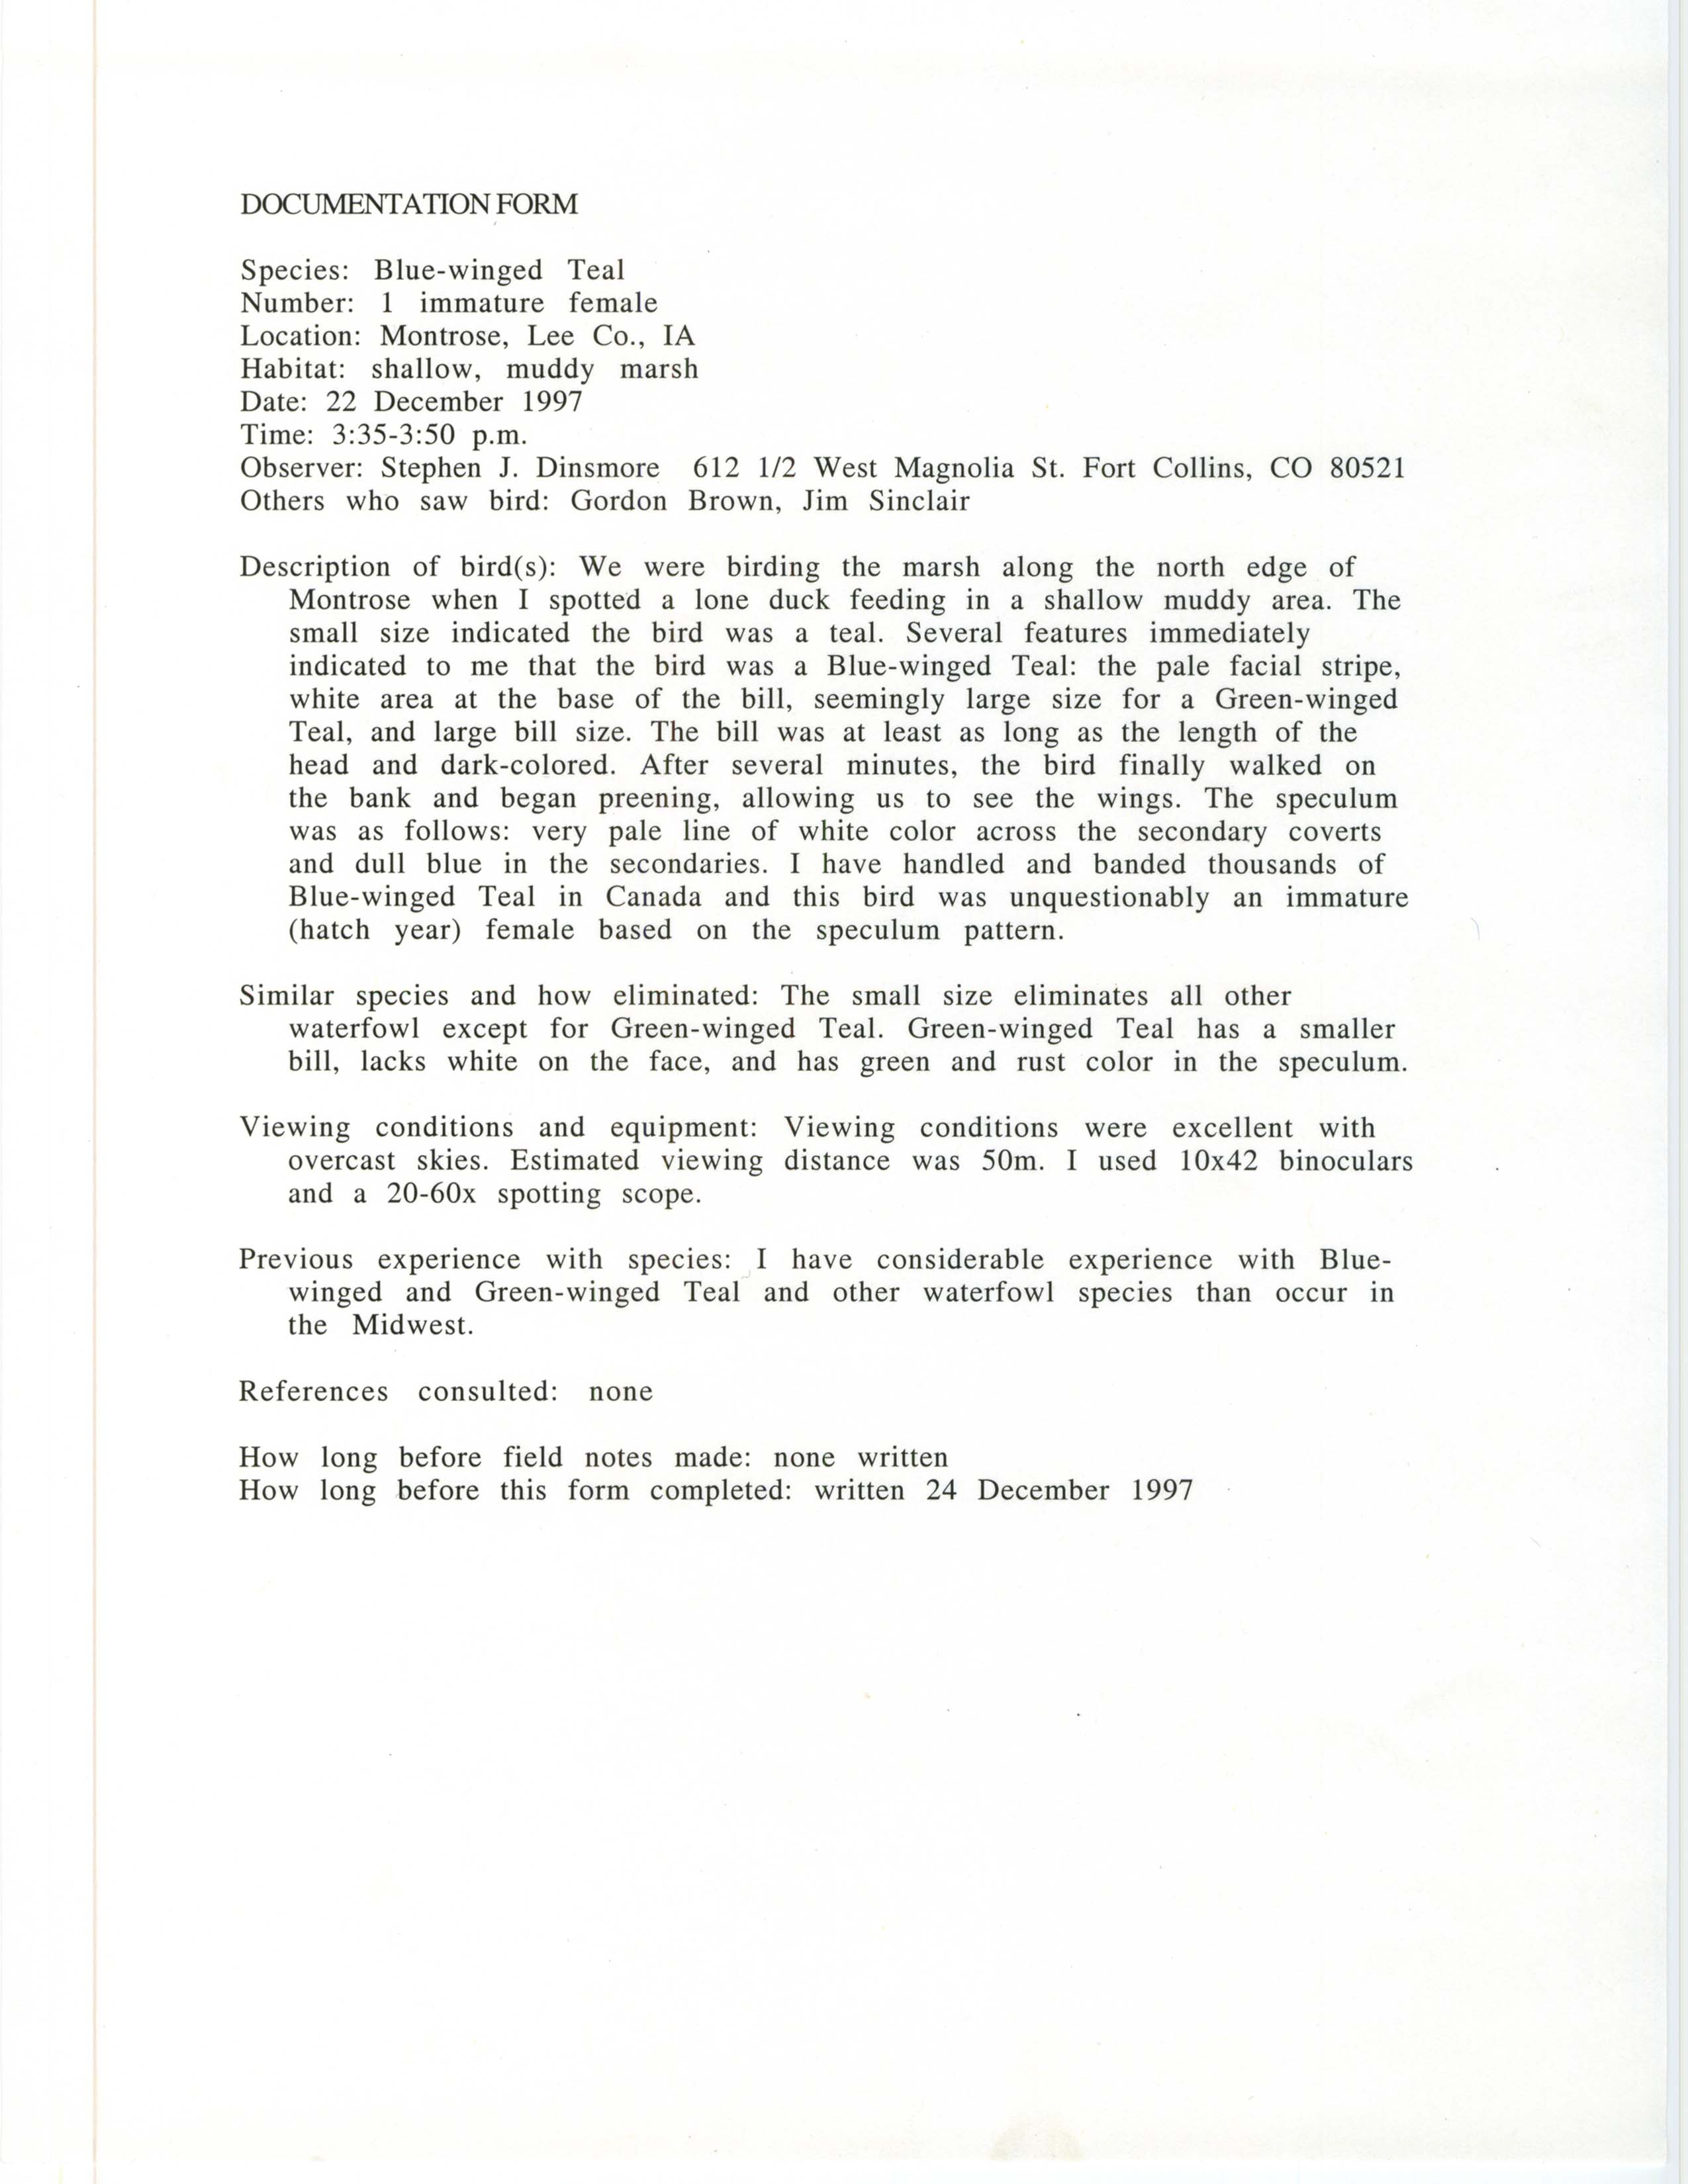 Rare bird documentation form for Blue-winged Teal at Montrose, 1997